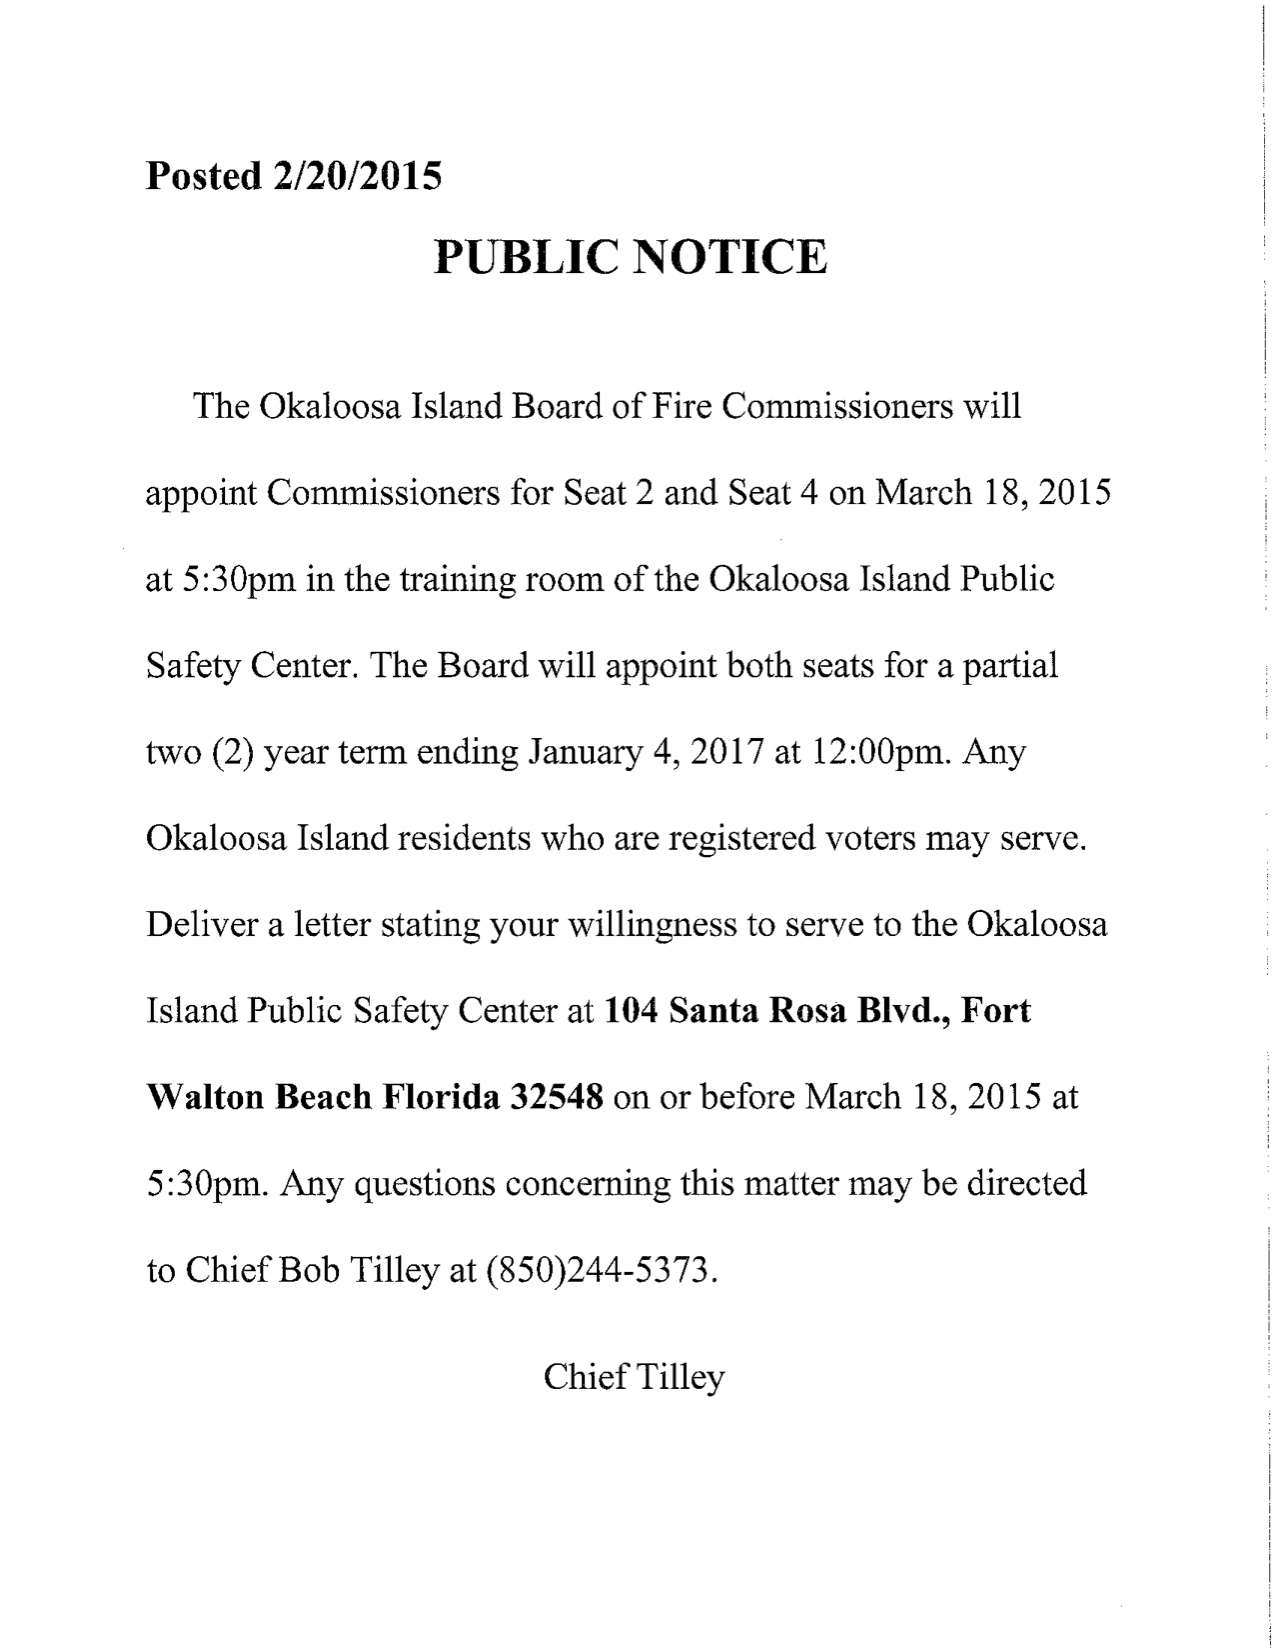 Public Notice for OIFD Board of Fire Commissioners Seats 2 and 4